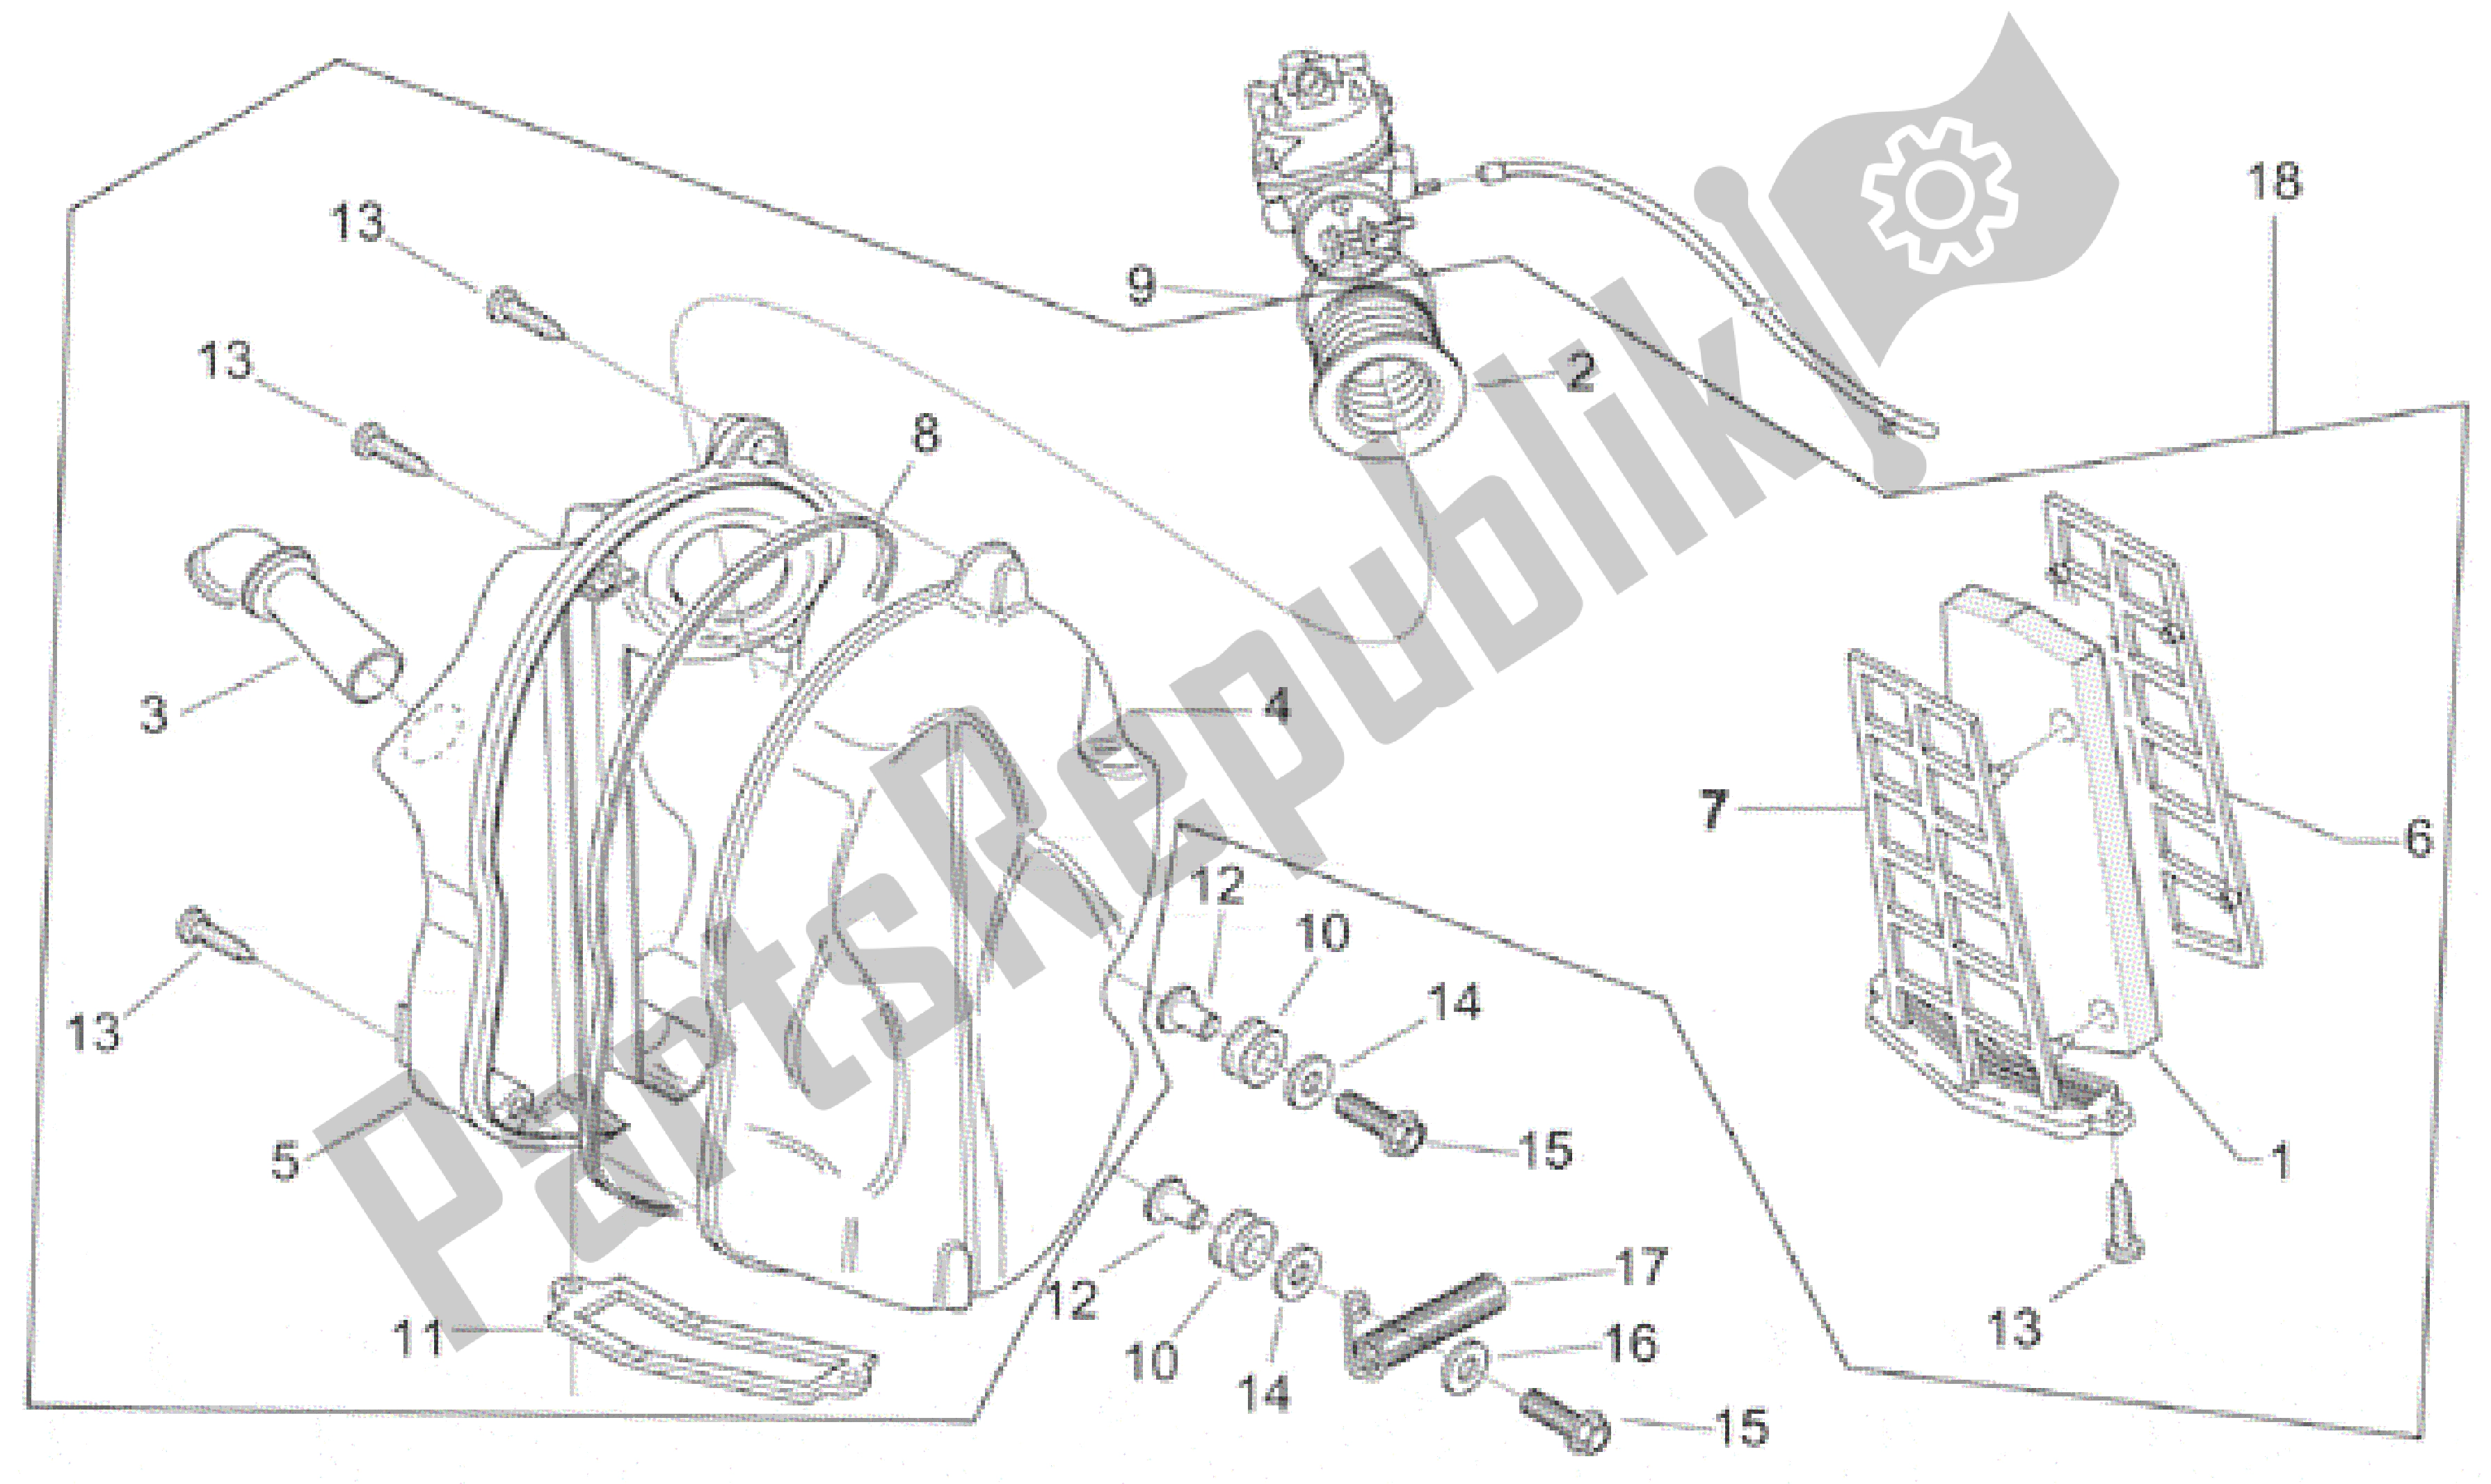 All parts for the Air Box of the Aprilia Scarabeo 50 2000 - 2005